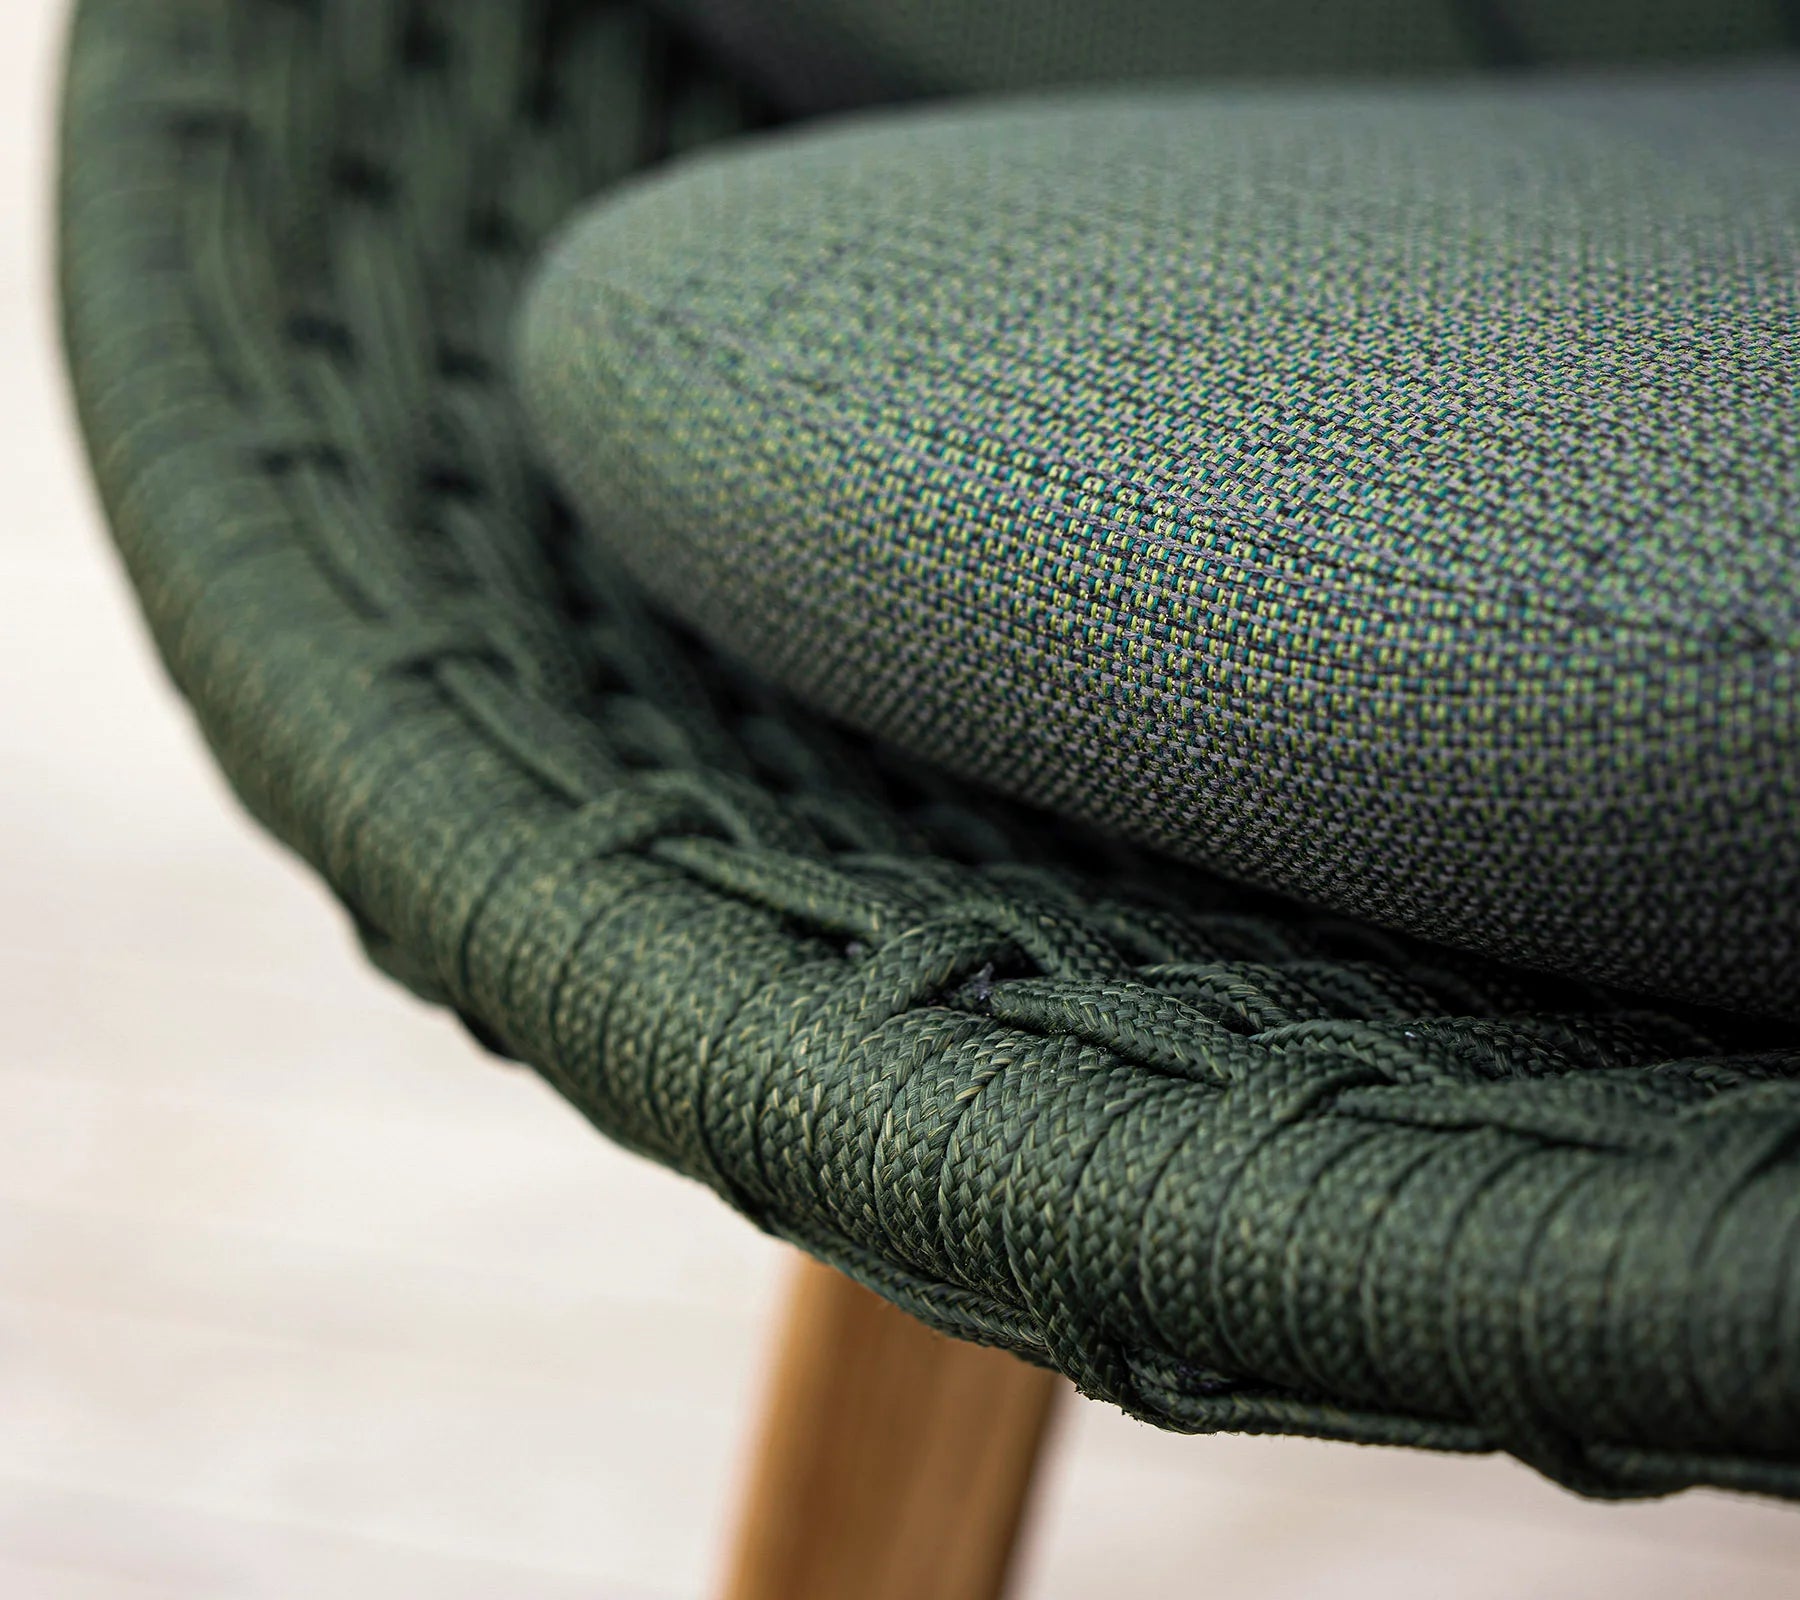 Boxhill's Peacock dark green outdoor lounge chair close up view